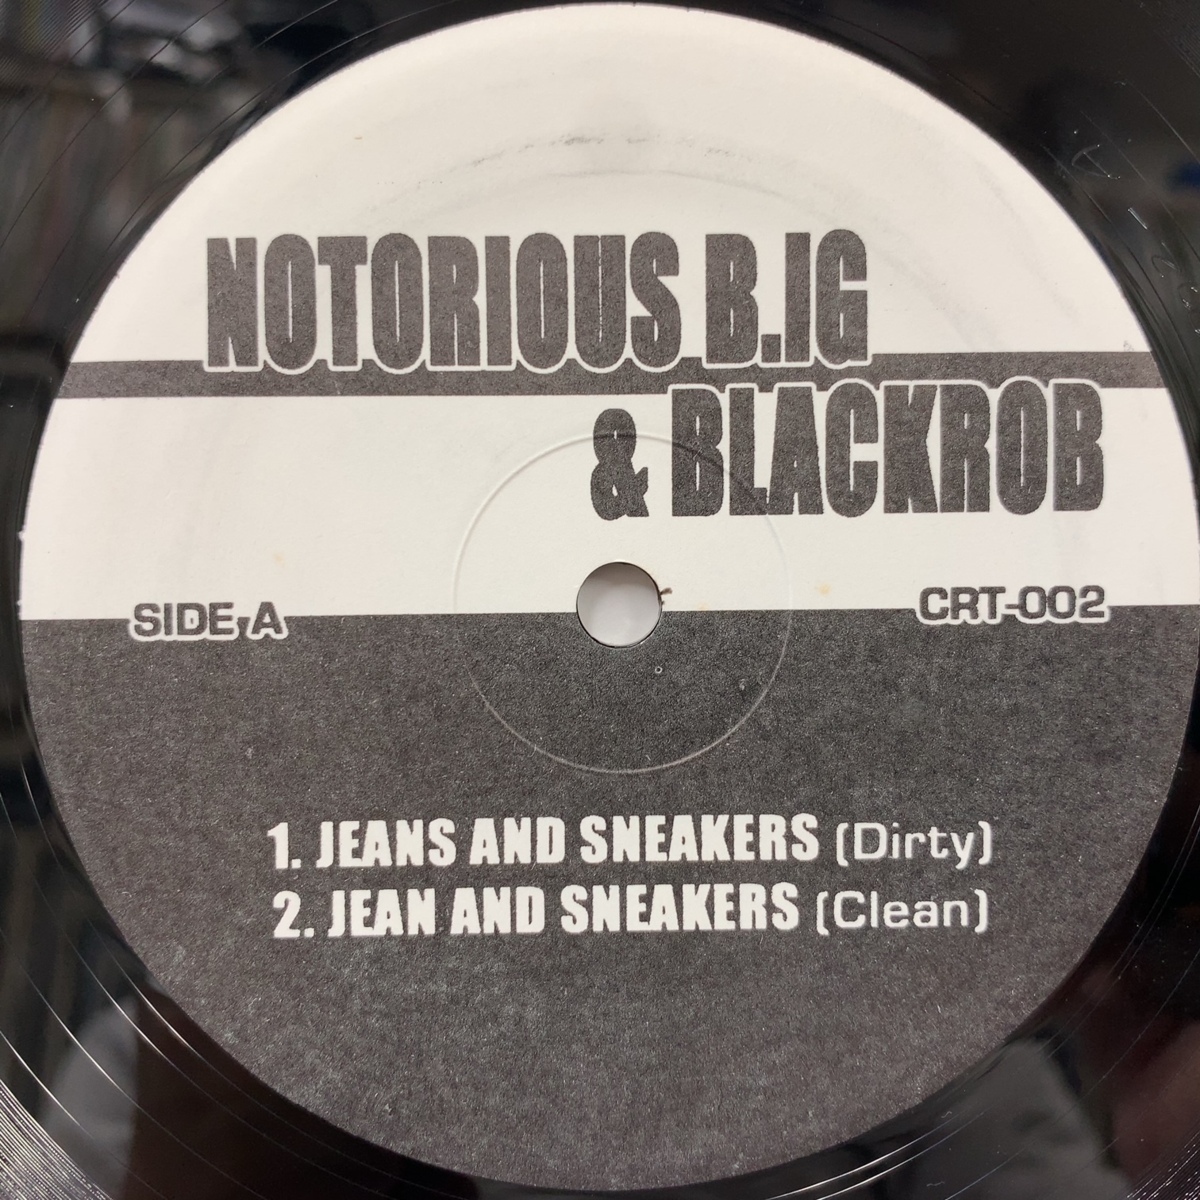 NOTORIOUS B.I.G. & BLACK ROB / TRU LIFE / Jeans And Sneakers / The New New York_画像1